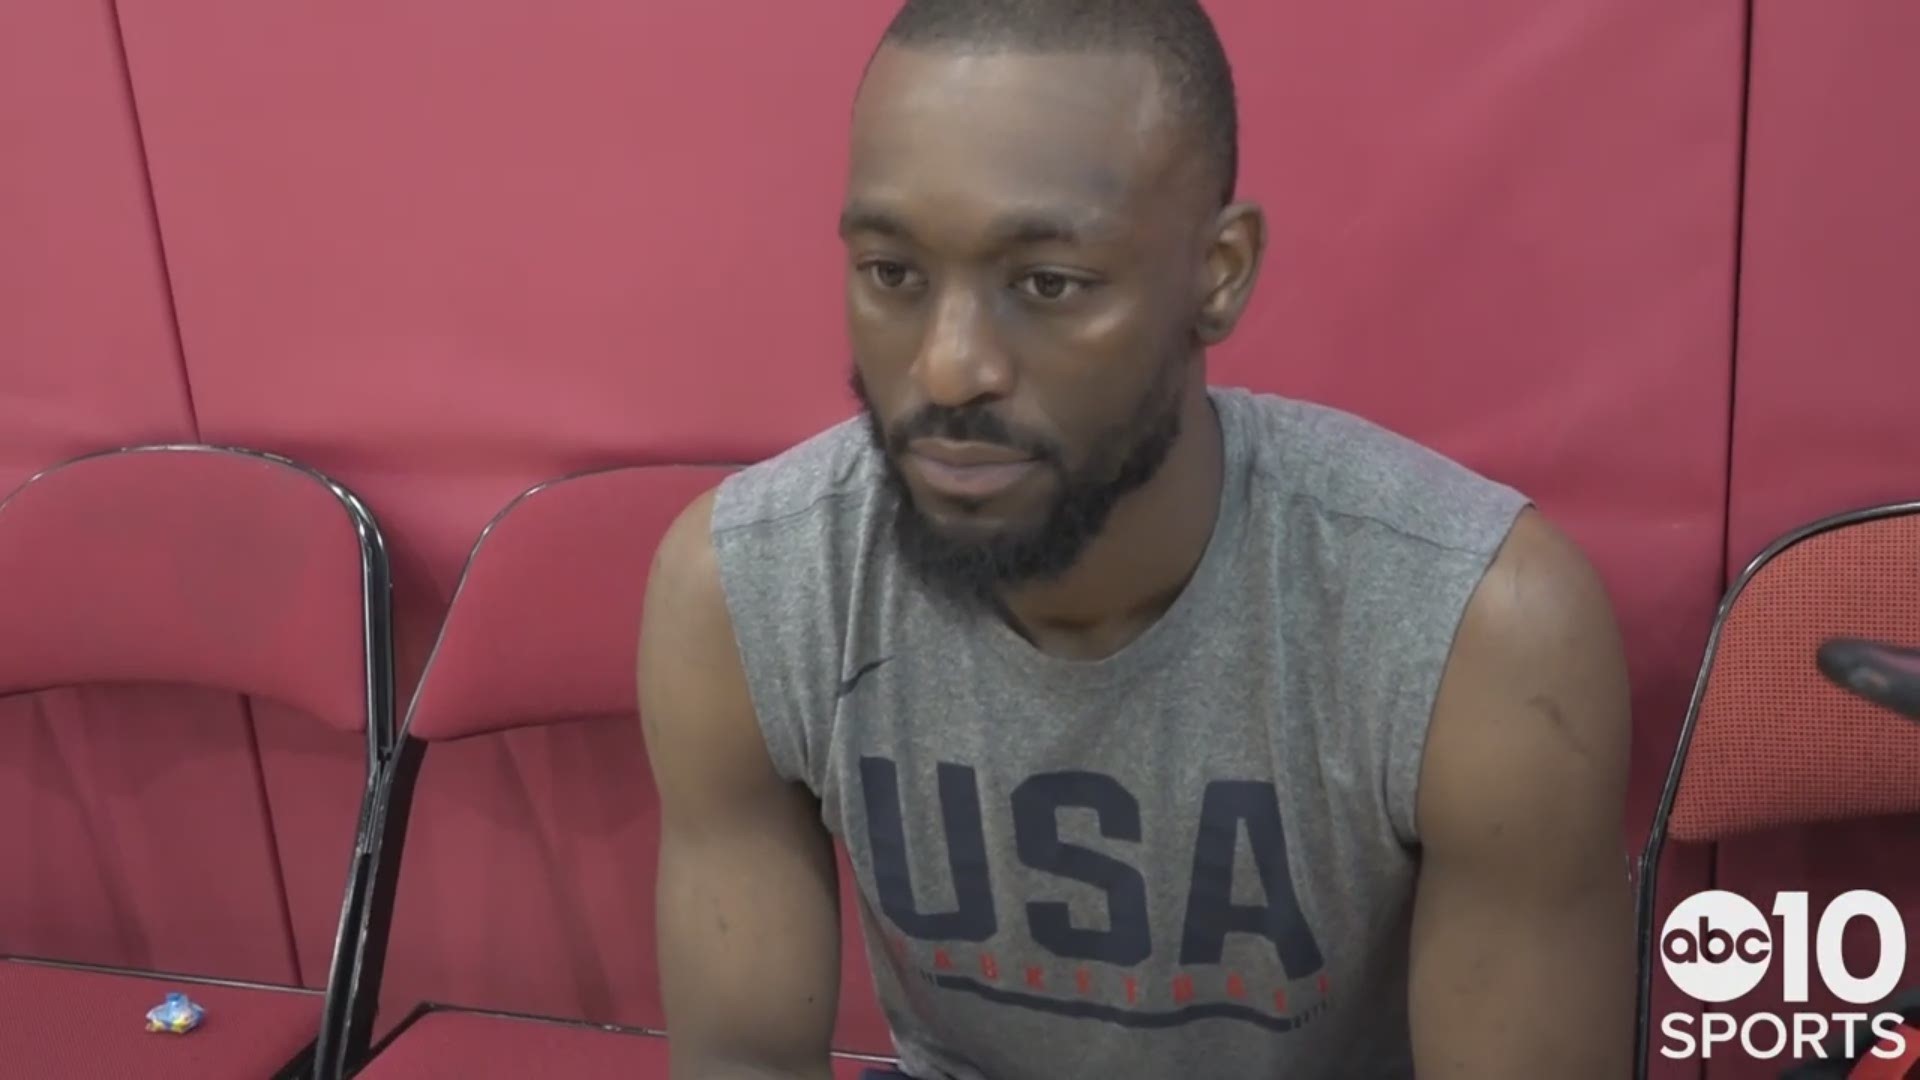 Following Wednesday's USA Basketball training camp session in Las Vegas, new Boston Celtics guard Kemba Walker talks about becoming a senior member with Team USA, the rise of Sacramento Kings point guard De'Aaron Fox to the national team and the interaction he has with the younger NBA stars.